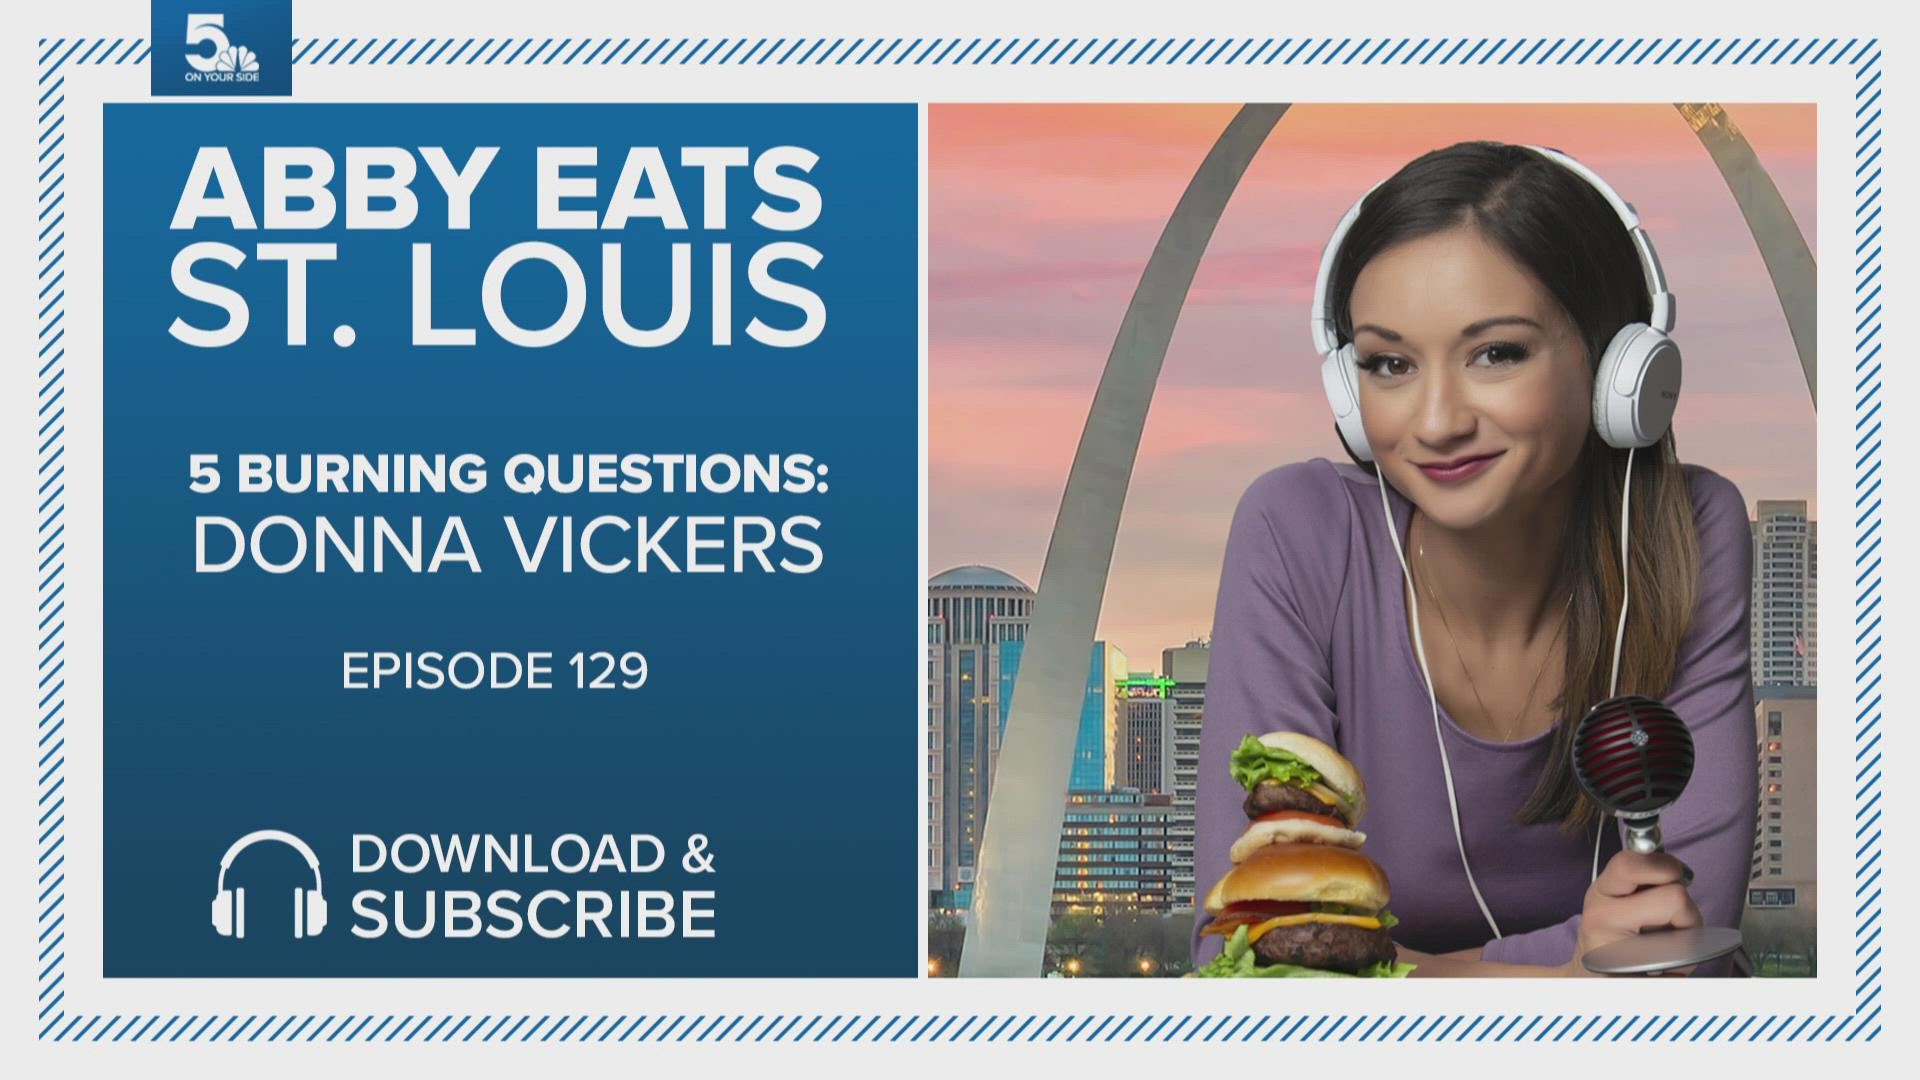 Donna Vickers went to culinary school, but her recipes were born in her mother's kitchen. Listen to the interview with in this Abby Eats St. Louis podcast episode.